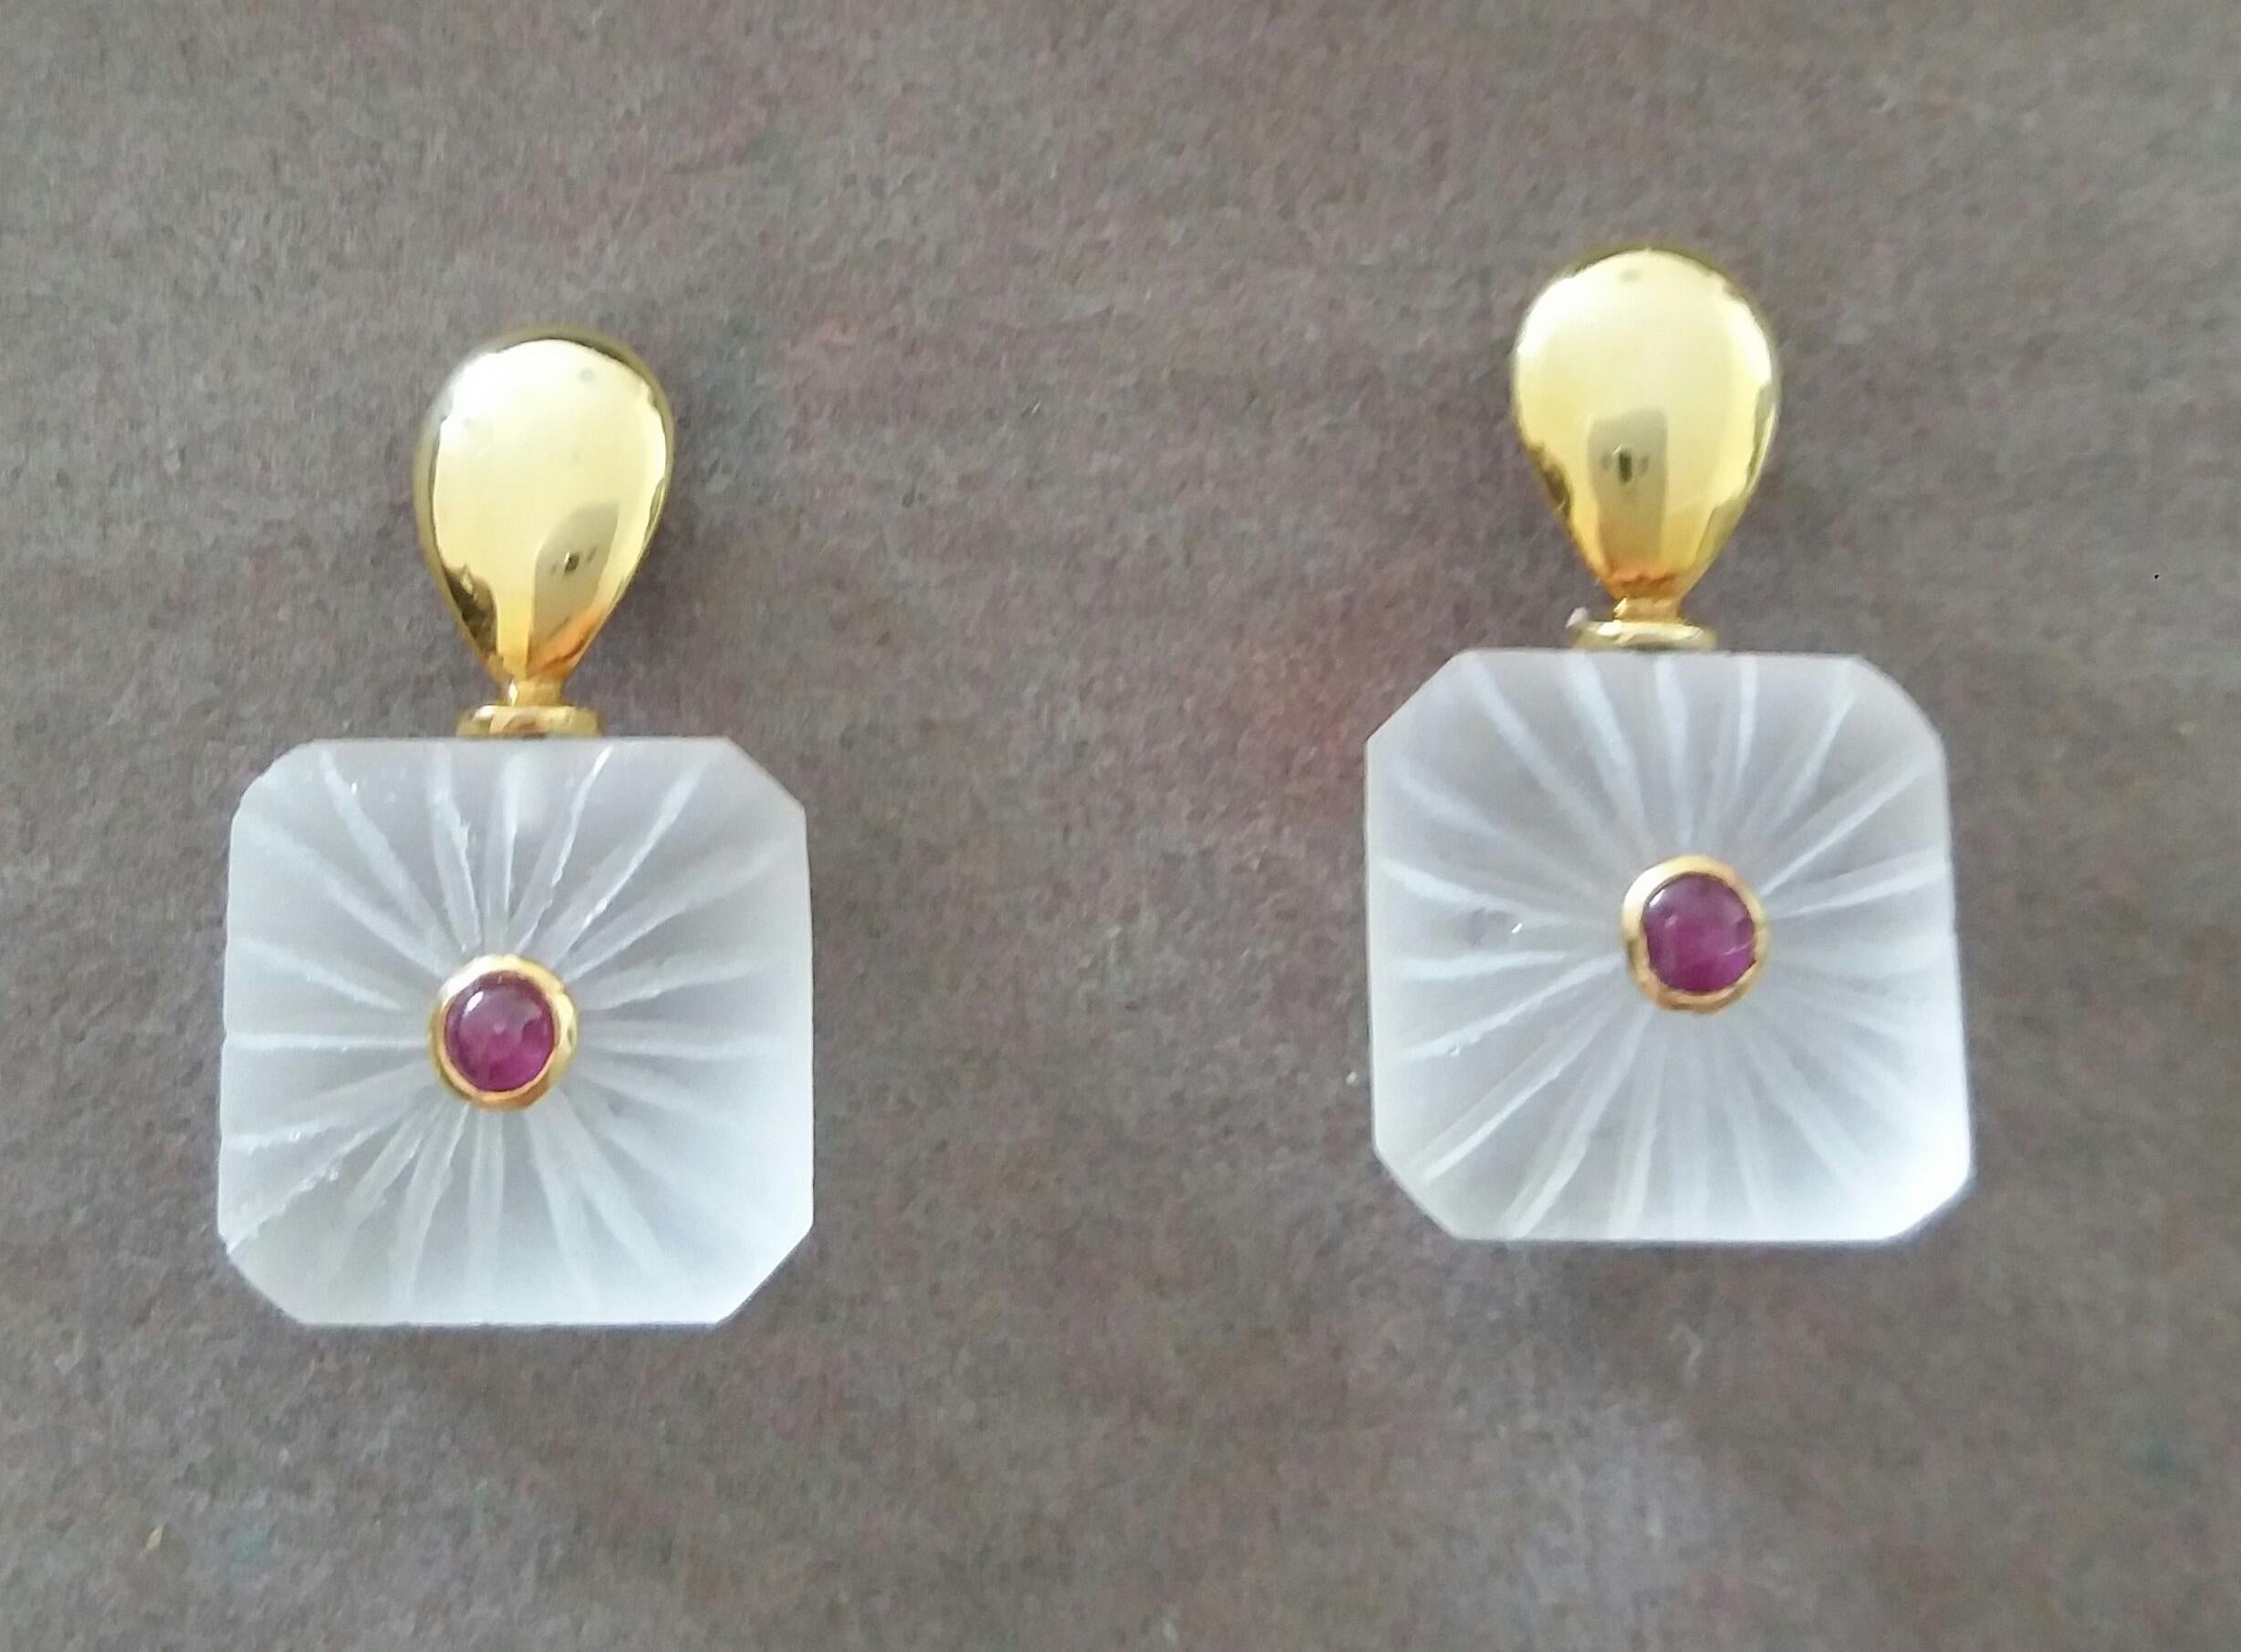 Simple Chic Earrings  made of 2 Engraved Octagon Shape Rock Crystals measuring 13 x 13 mm with 2 small round Ruby cabs set in yellow gold, suspended from 2 plain yellow gold elements in a flat drop shapes.

In 1978 our workshop started in Italy to